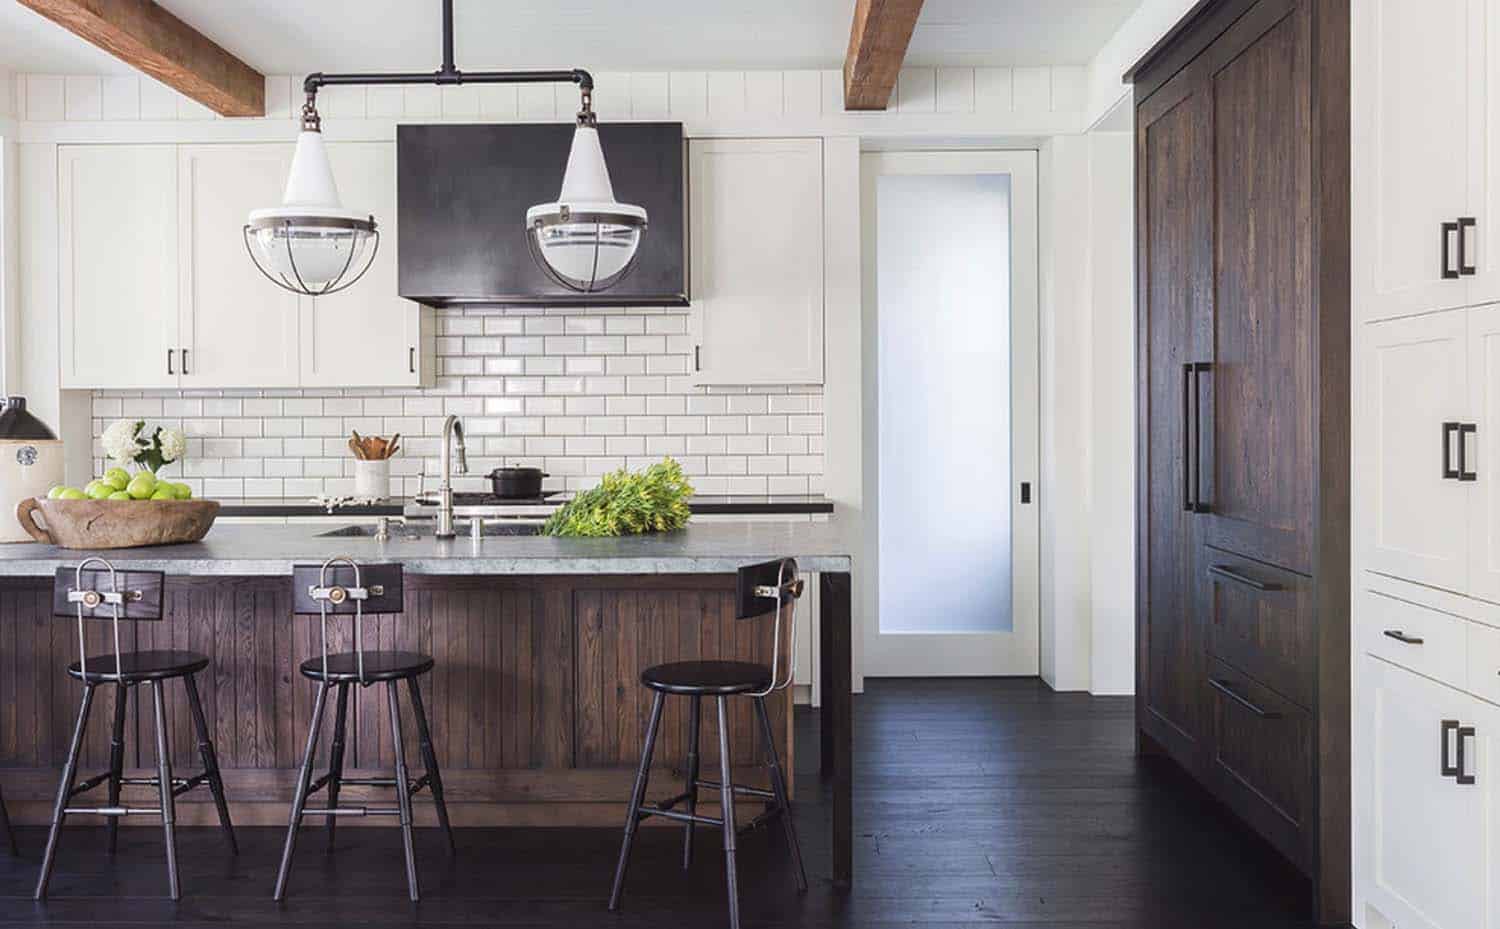 Modern farmhouse style with timeless interiors in Northern California